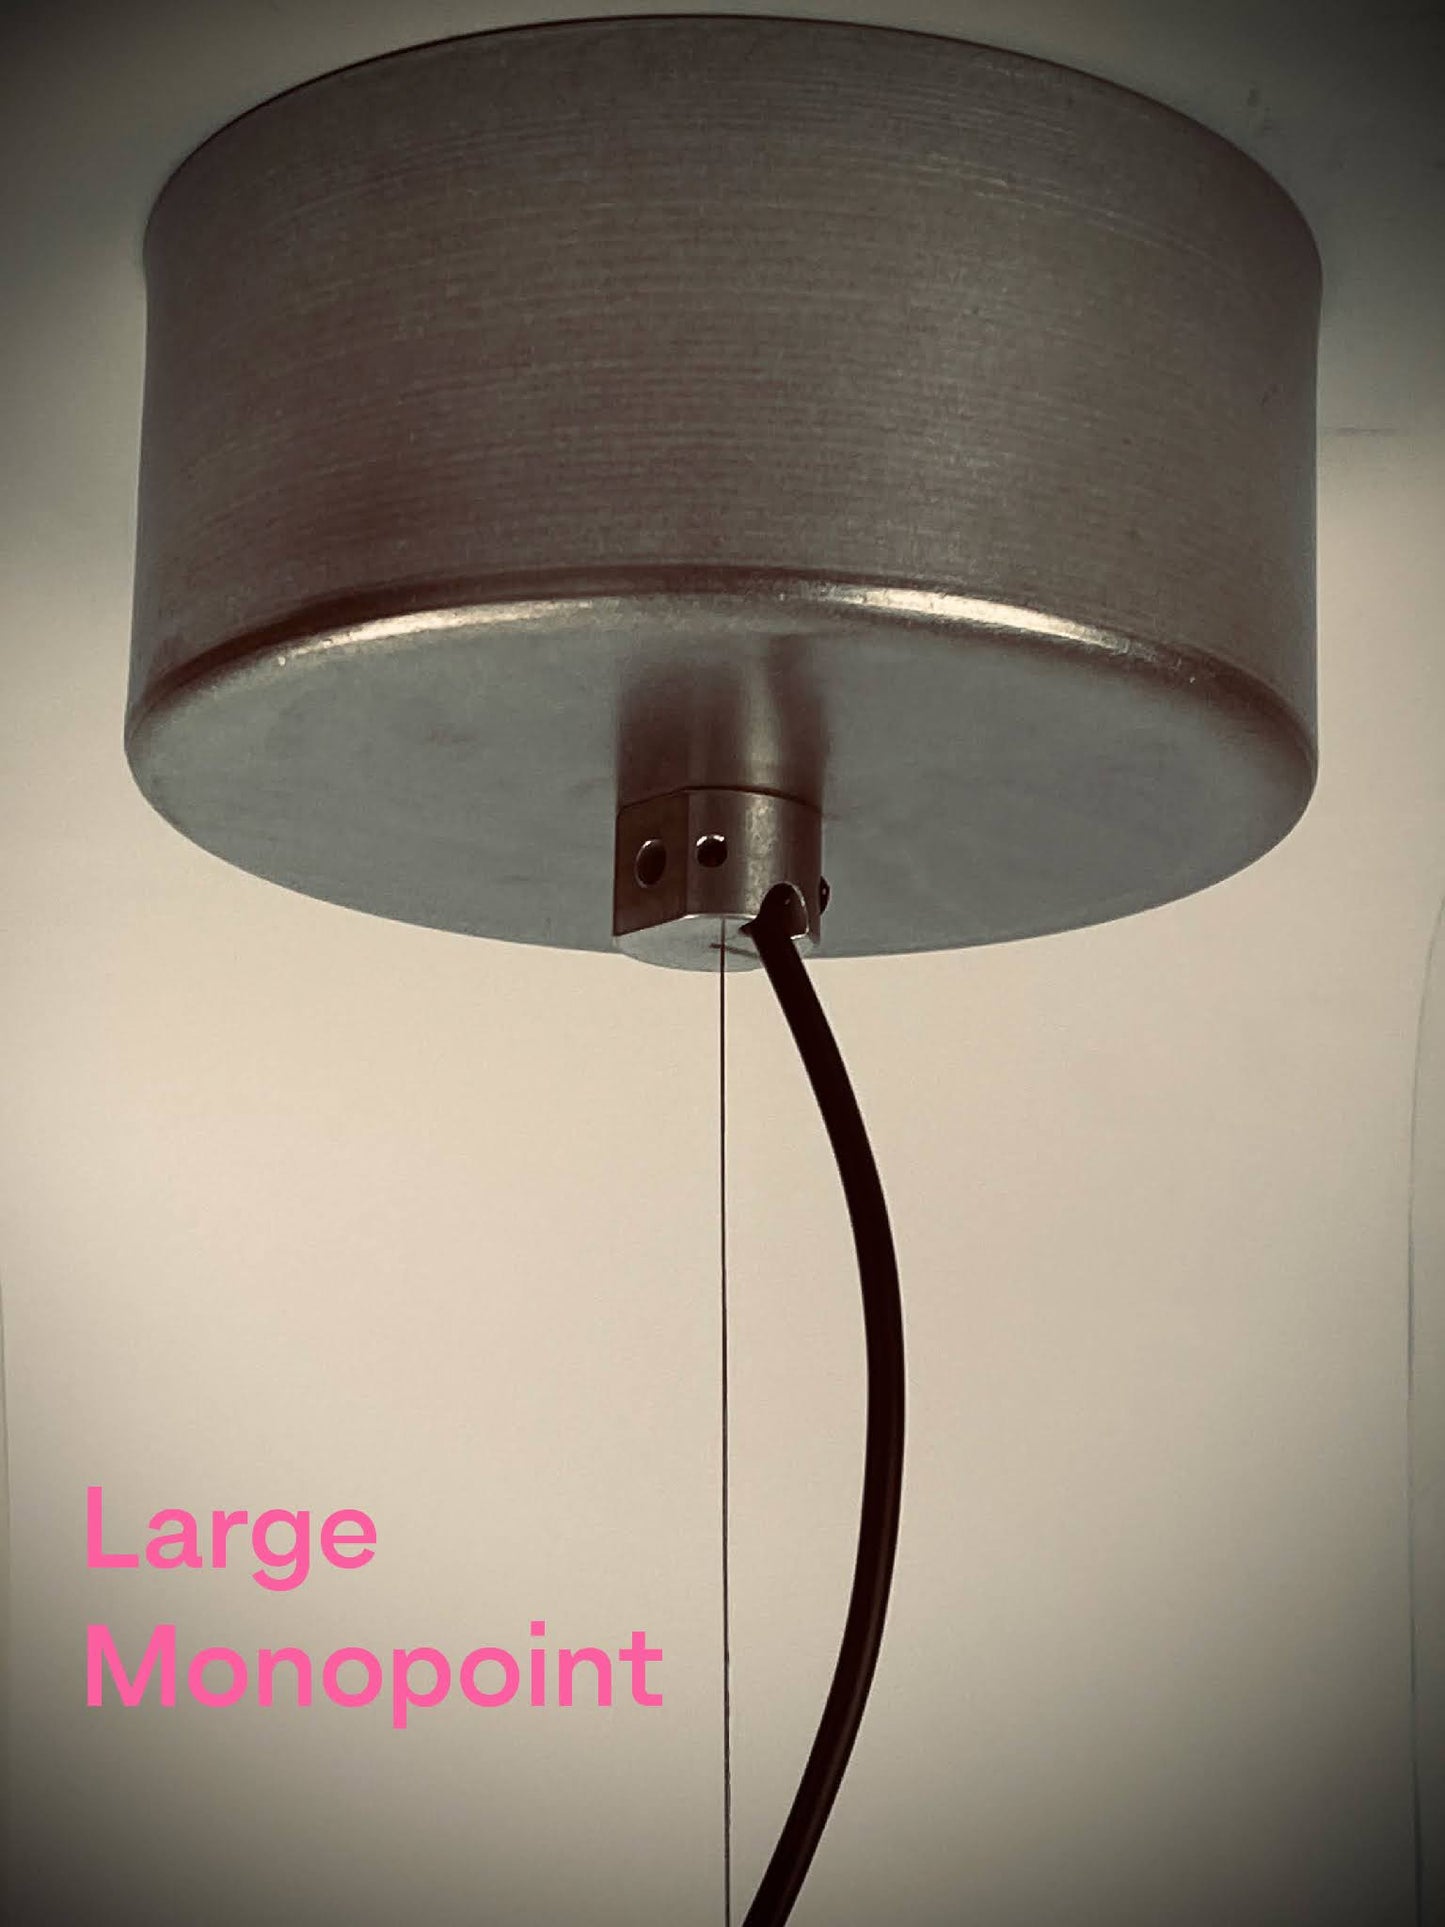 Installed large monopoint for a budget architectural pendant that was designed for circular economy